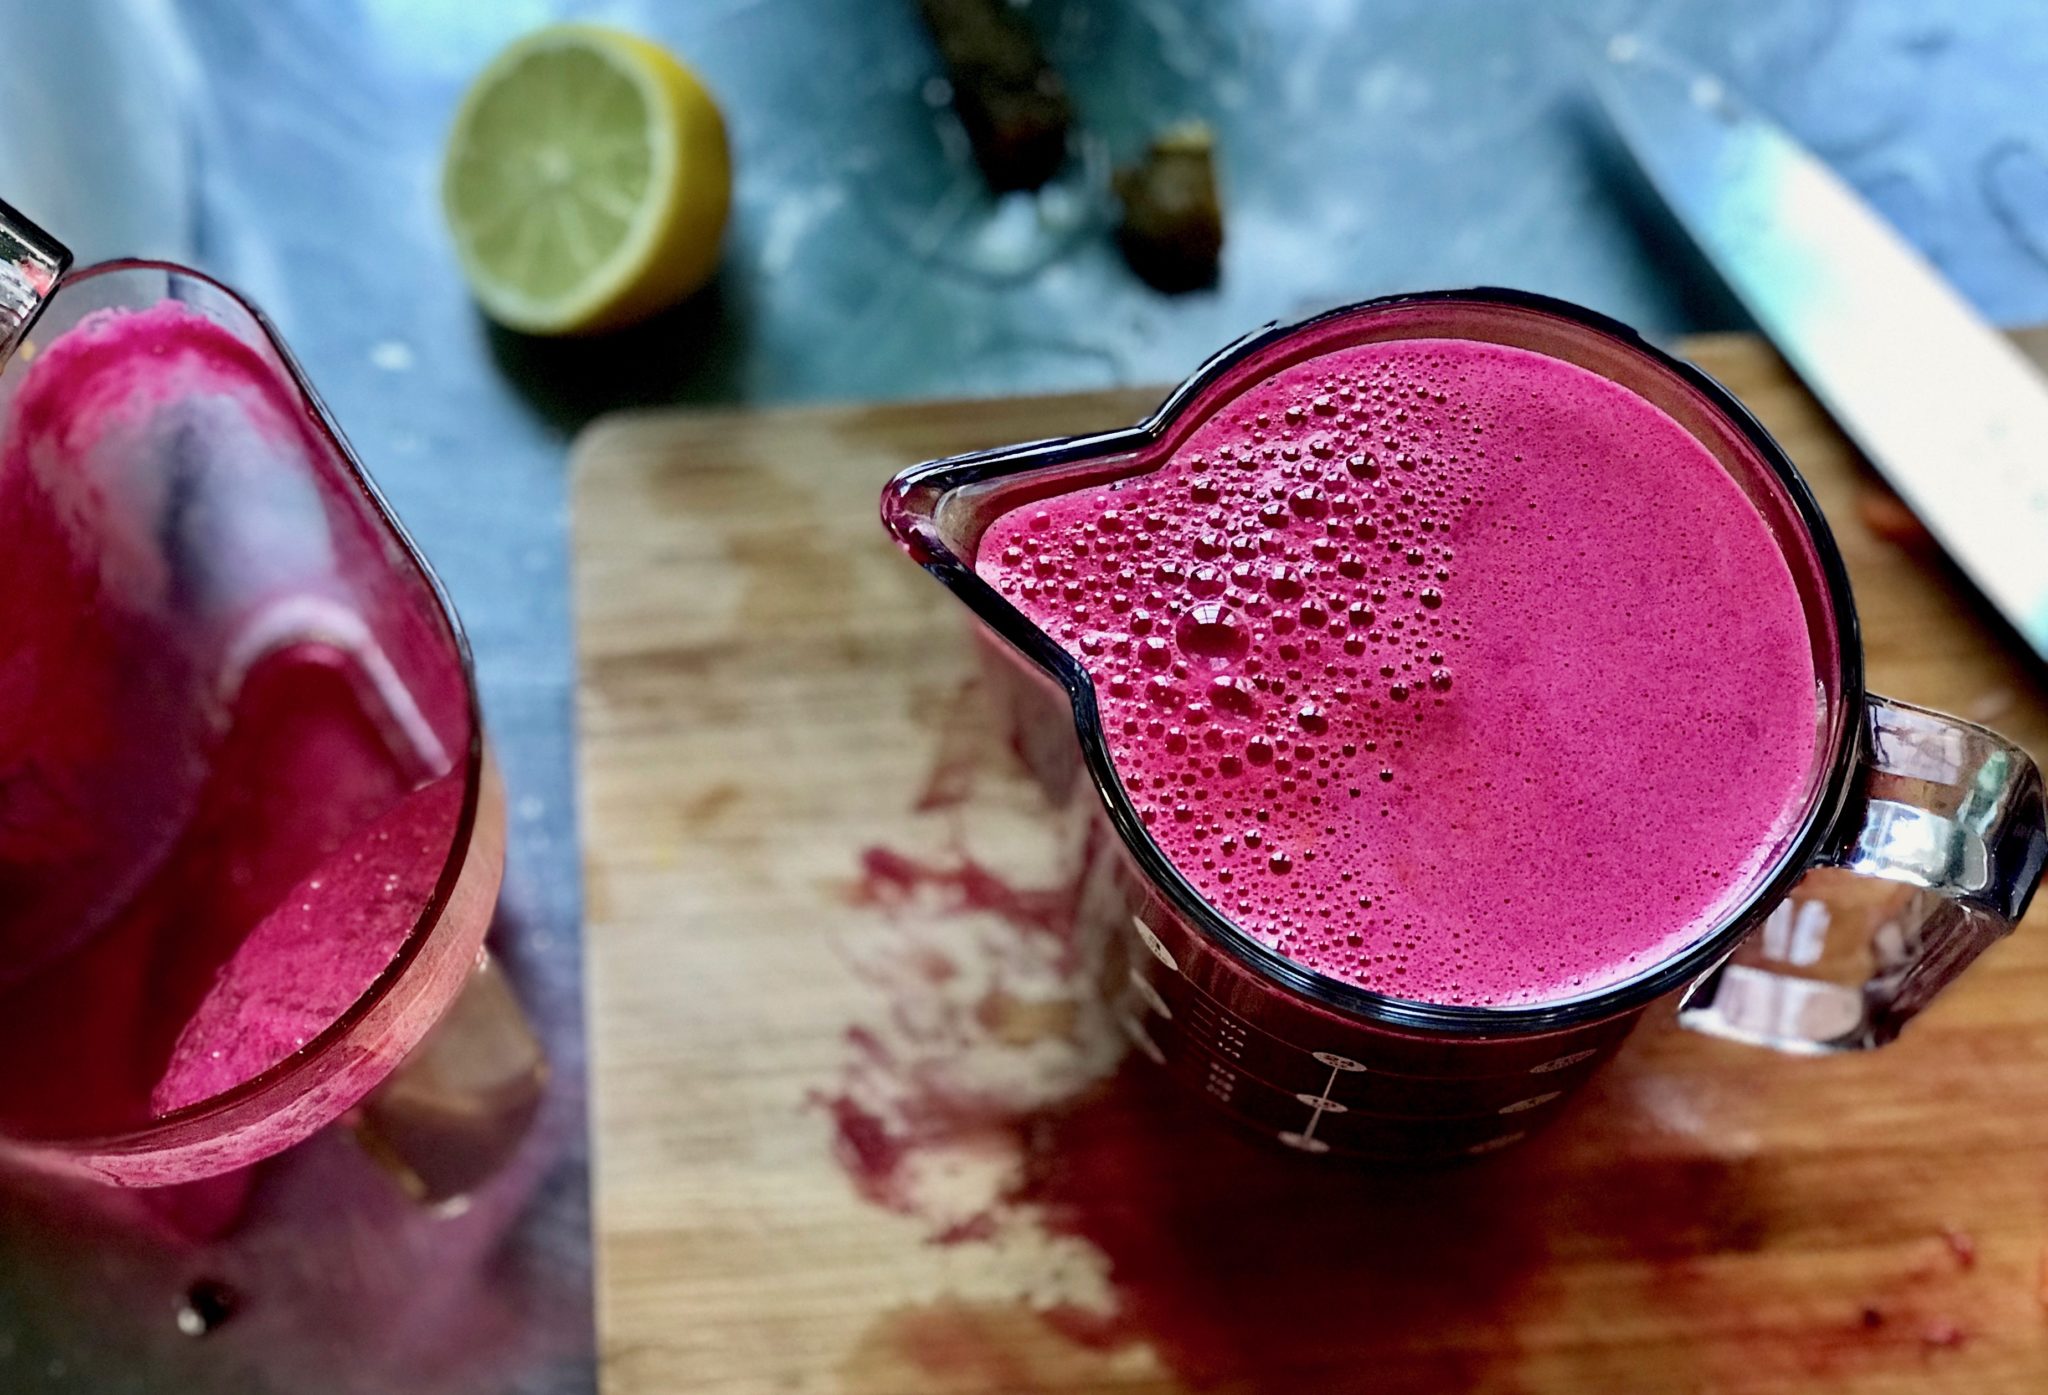 beet, carrot, and apple juice